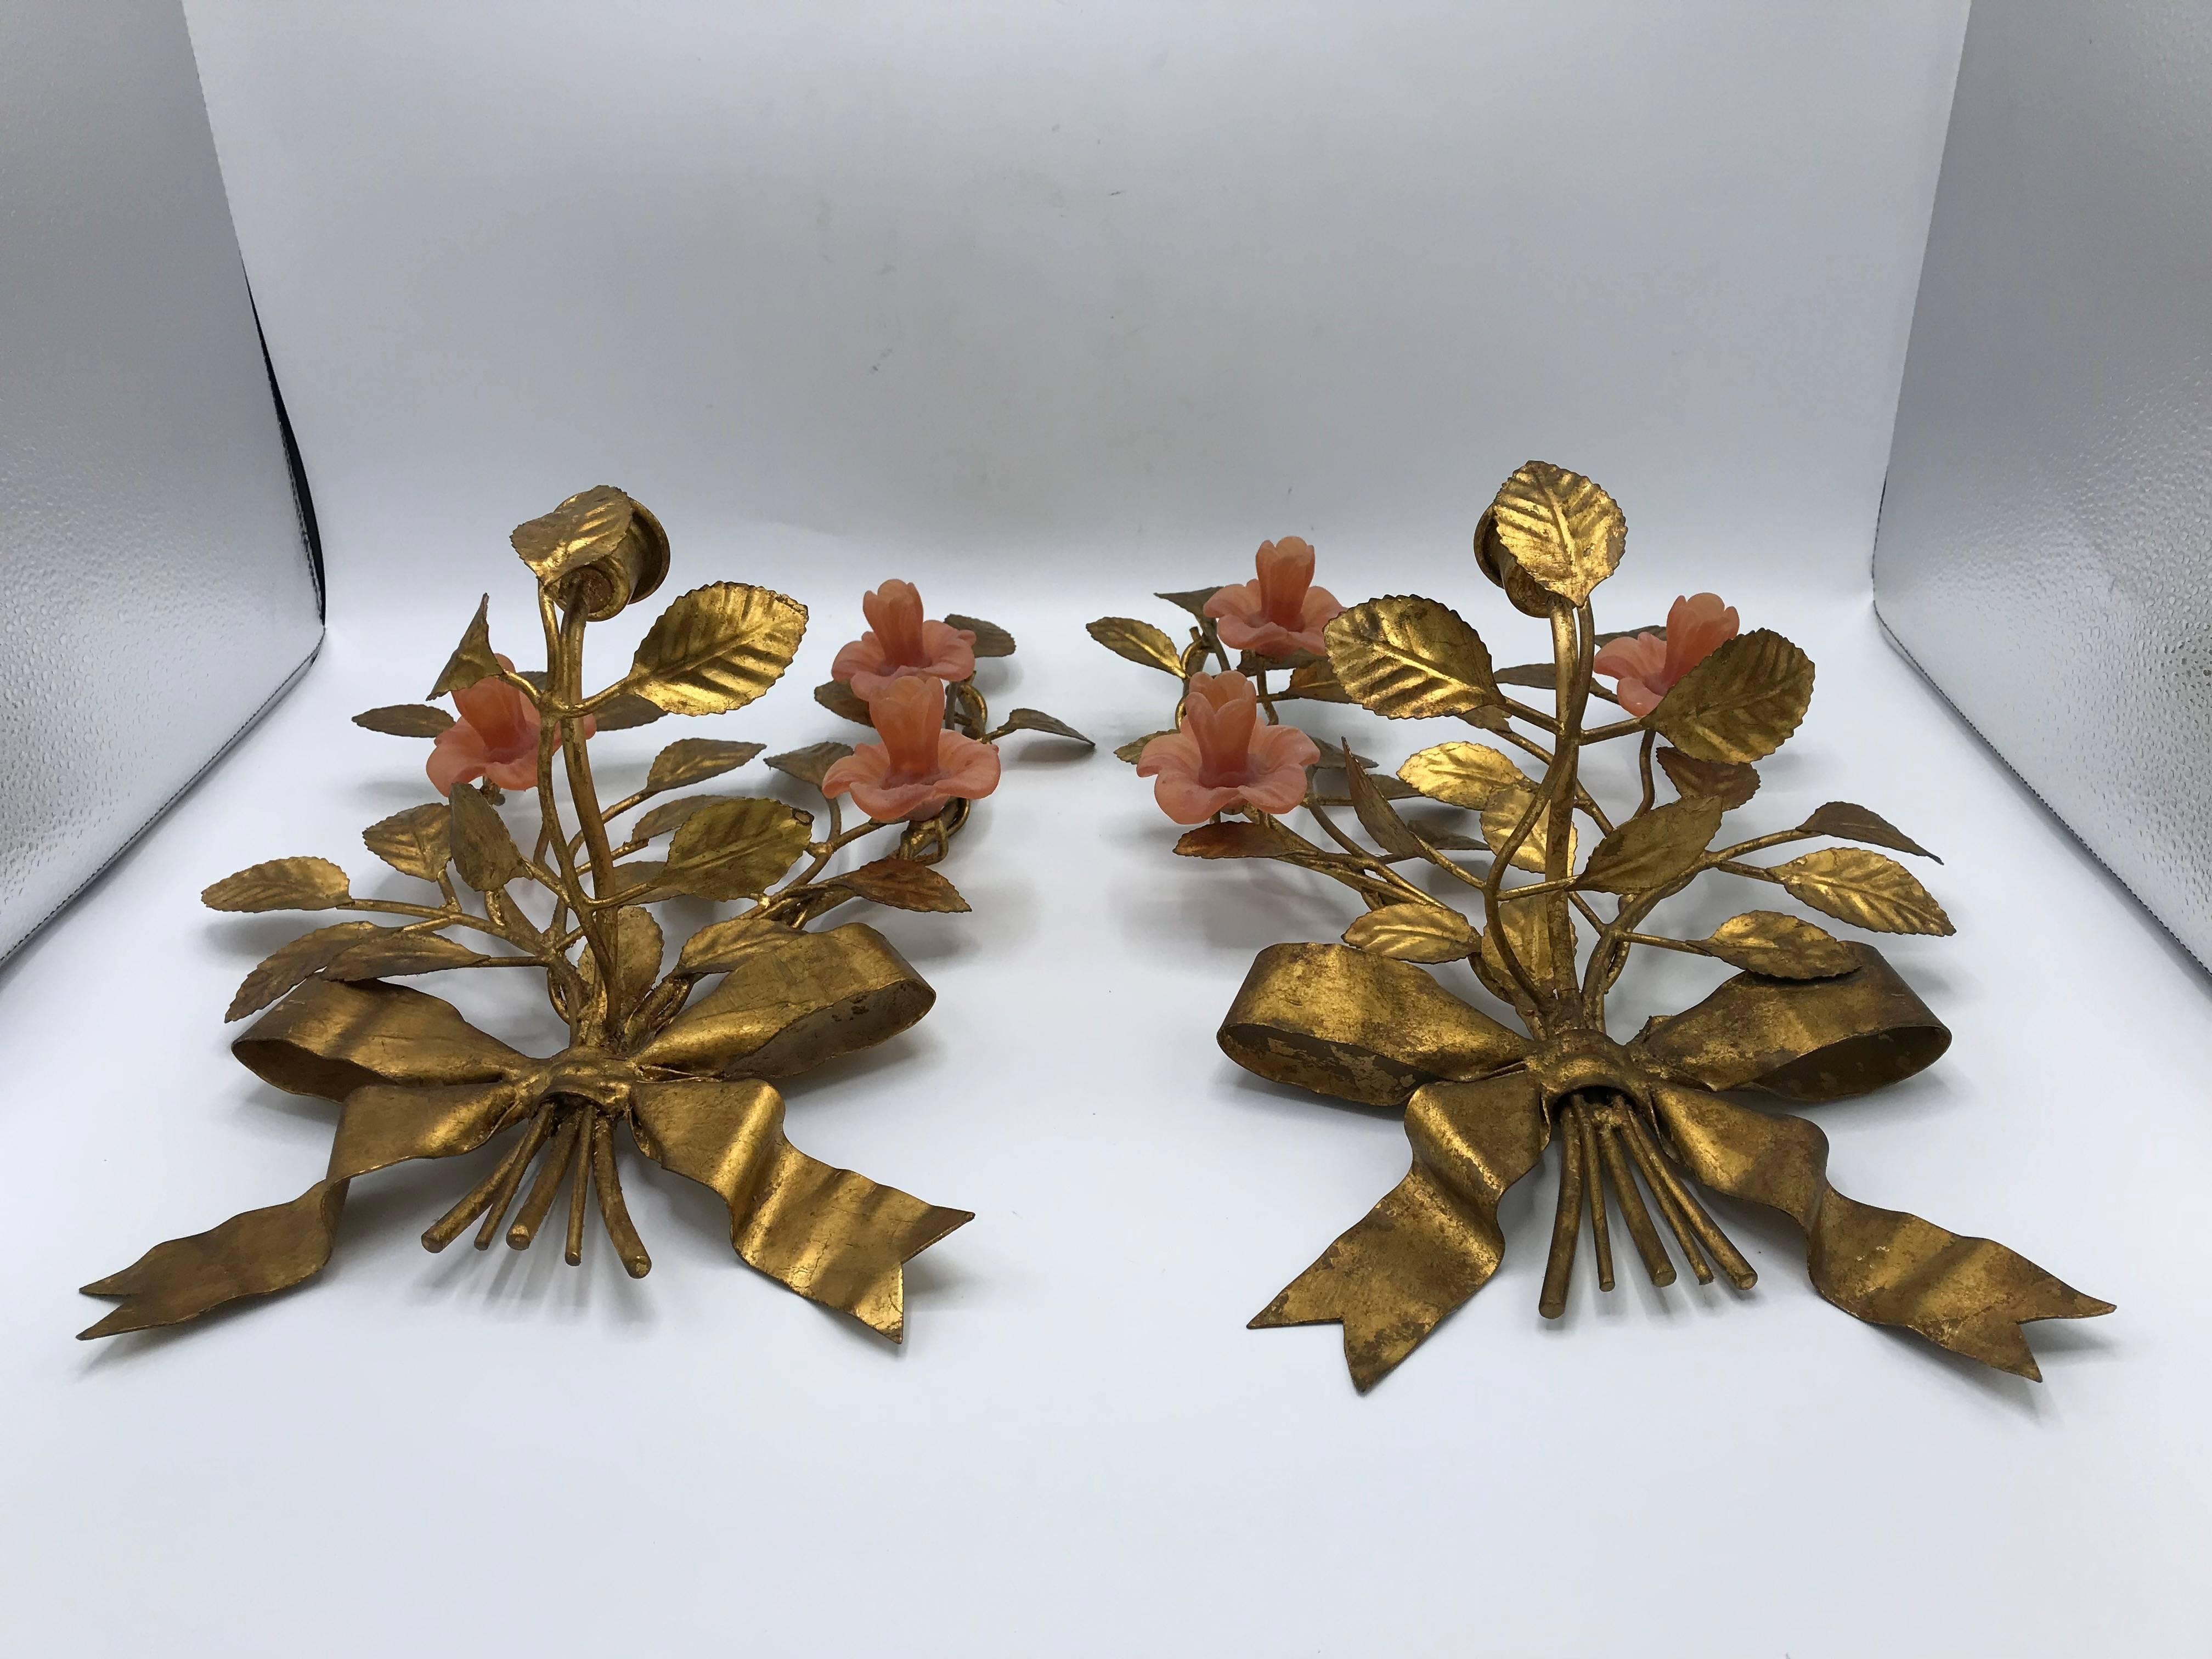 Offered is an exquisite, pair of 1960s Italian gilt wall sconces. Each are mirrored to one another, with three beautiful pink roses, gilt vines, and adorned with a knotted bow. The gilt frame is metal, roses are a matted resin. The candlestick arm